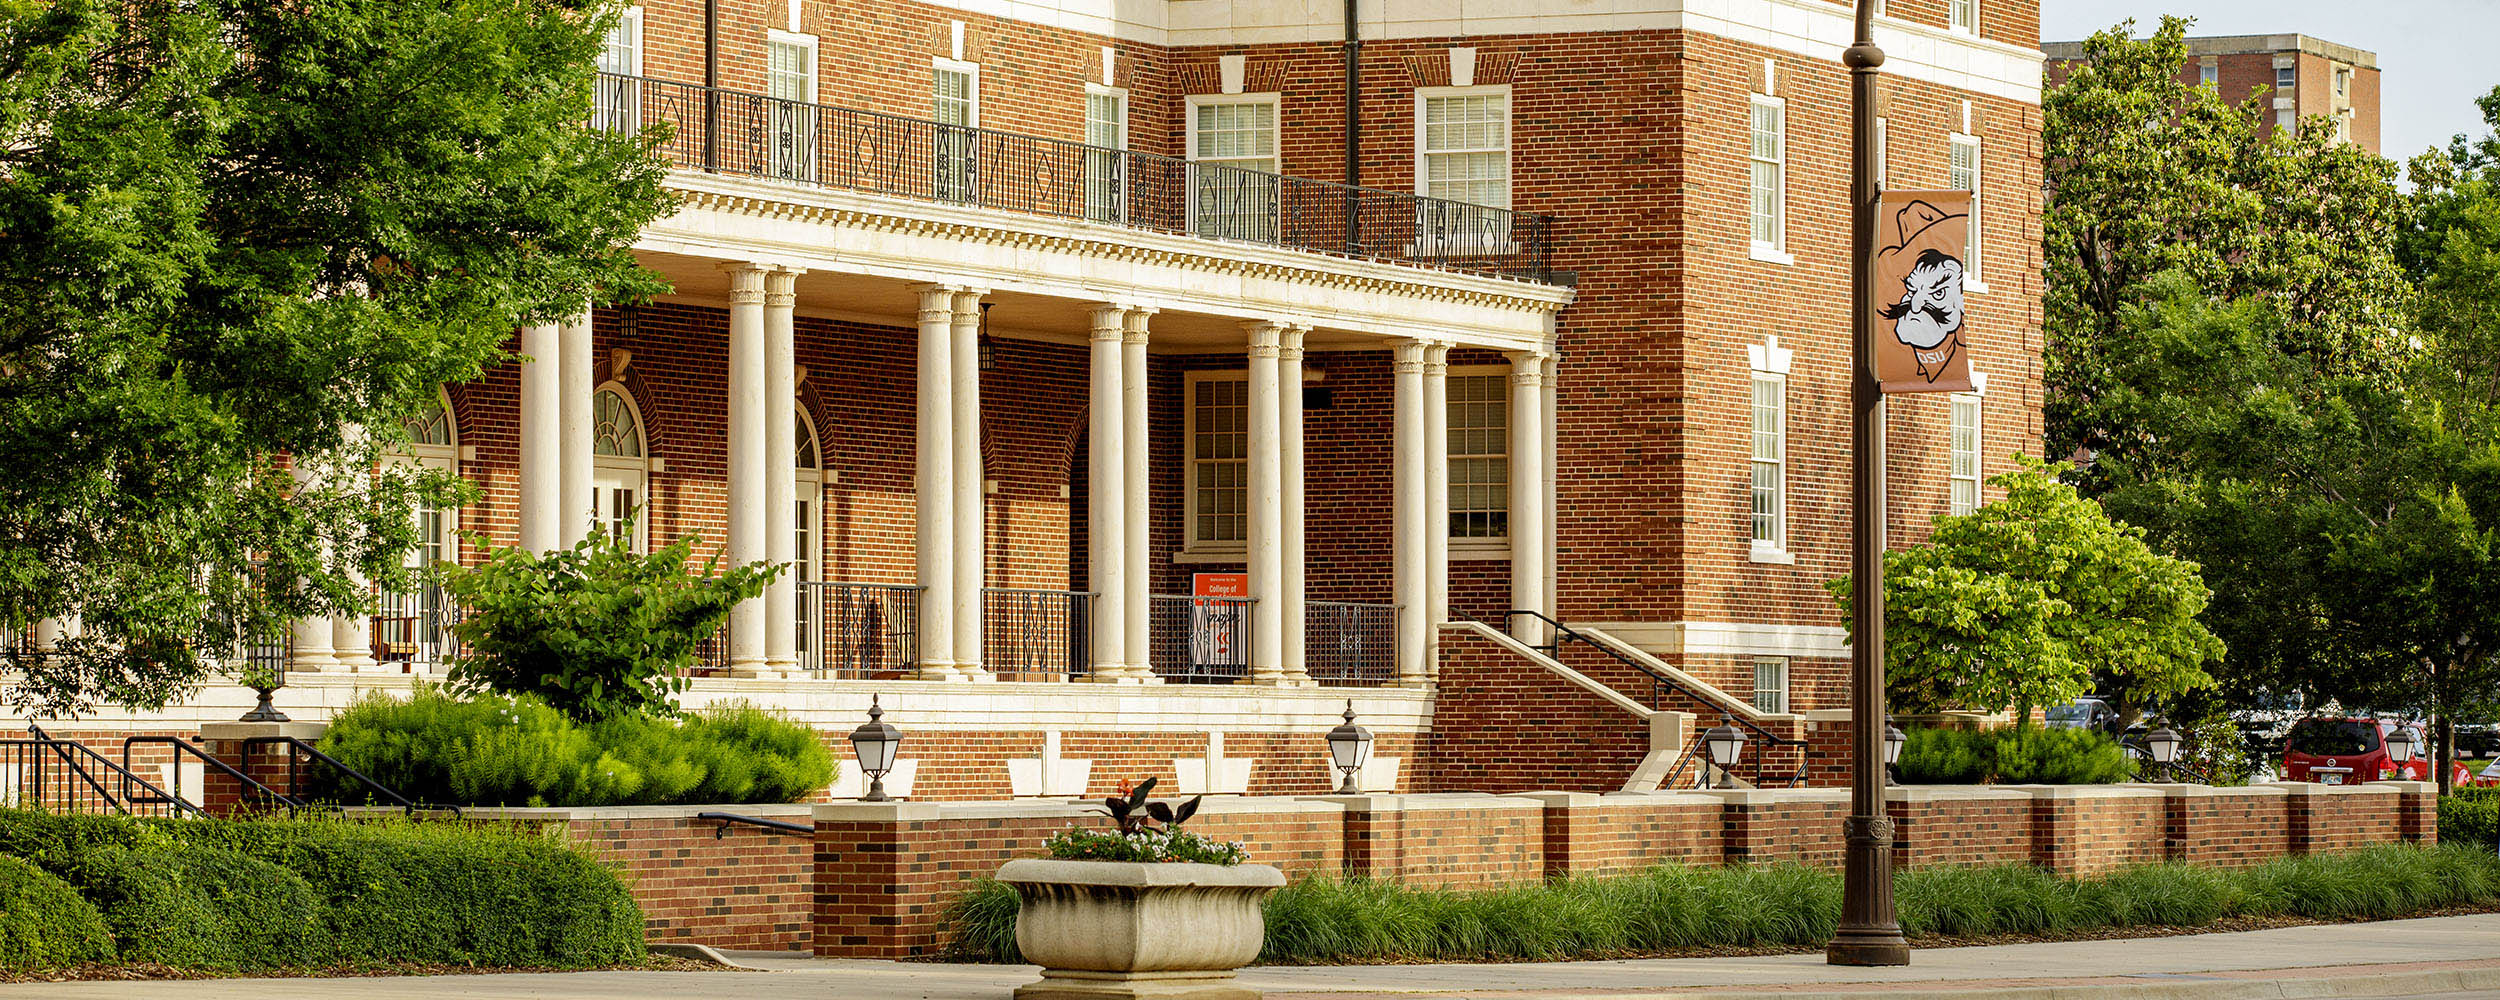 The campus of Oklahoma State University.